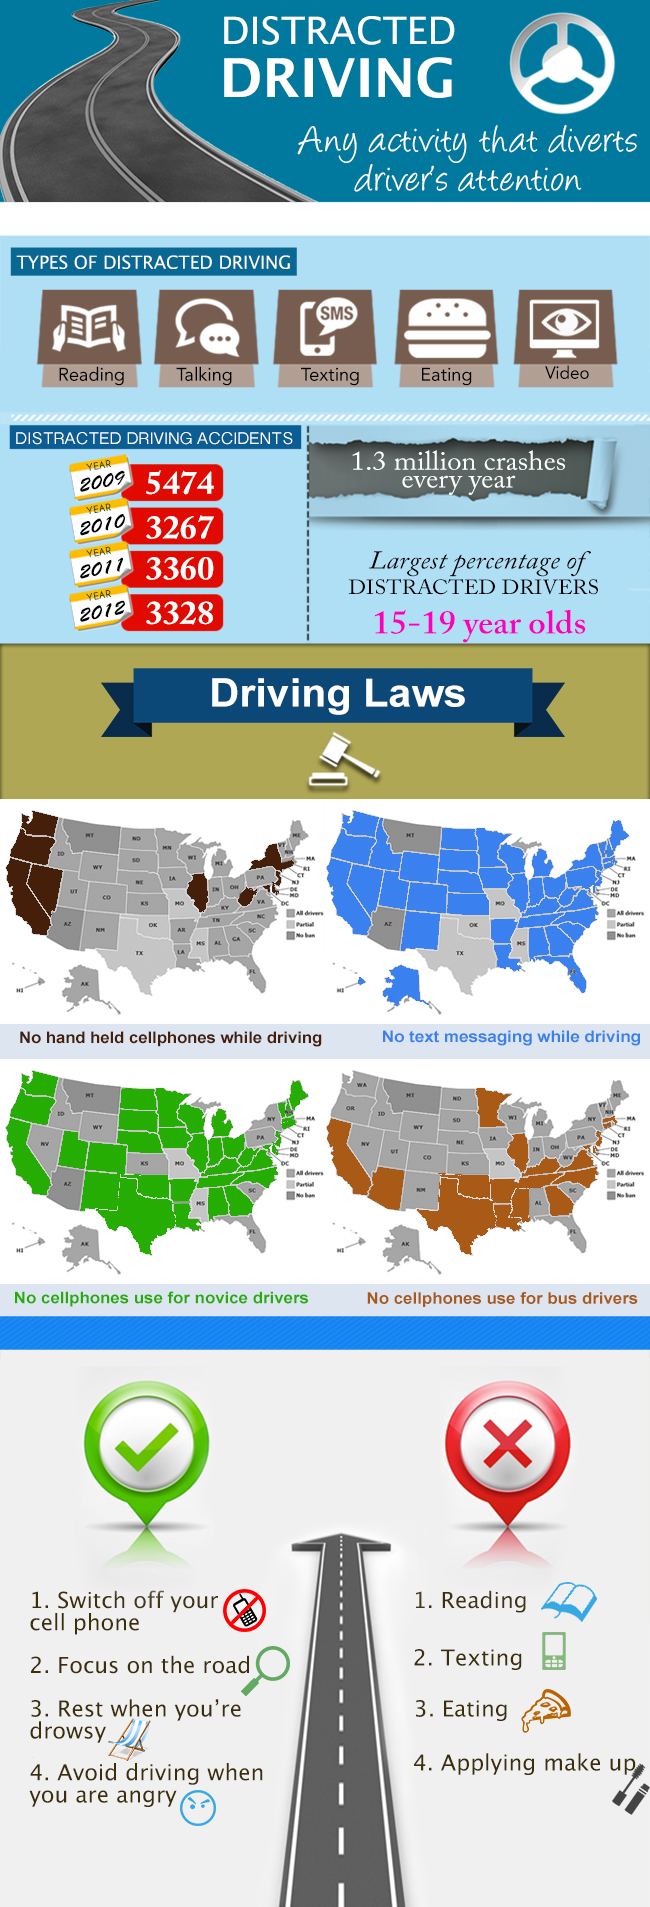 Dummies' guide to distracted driving laws 